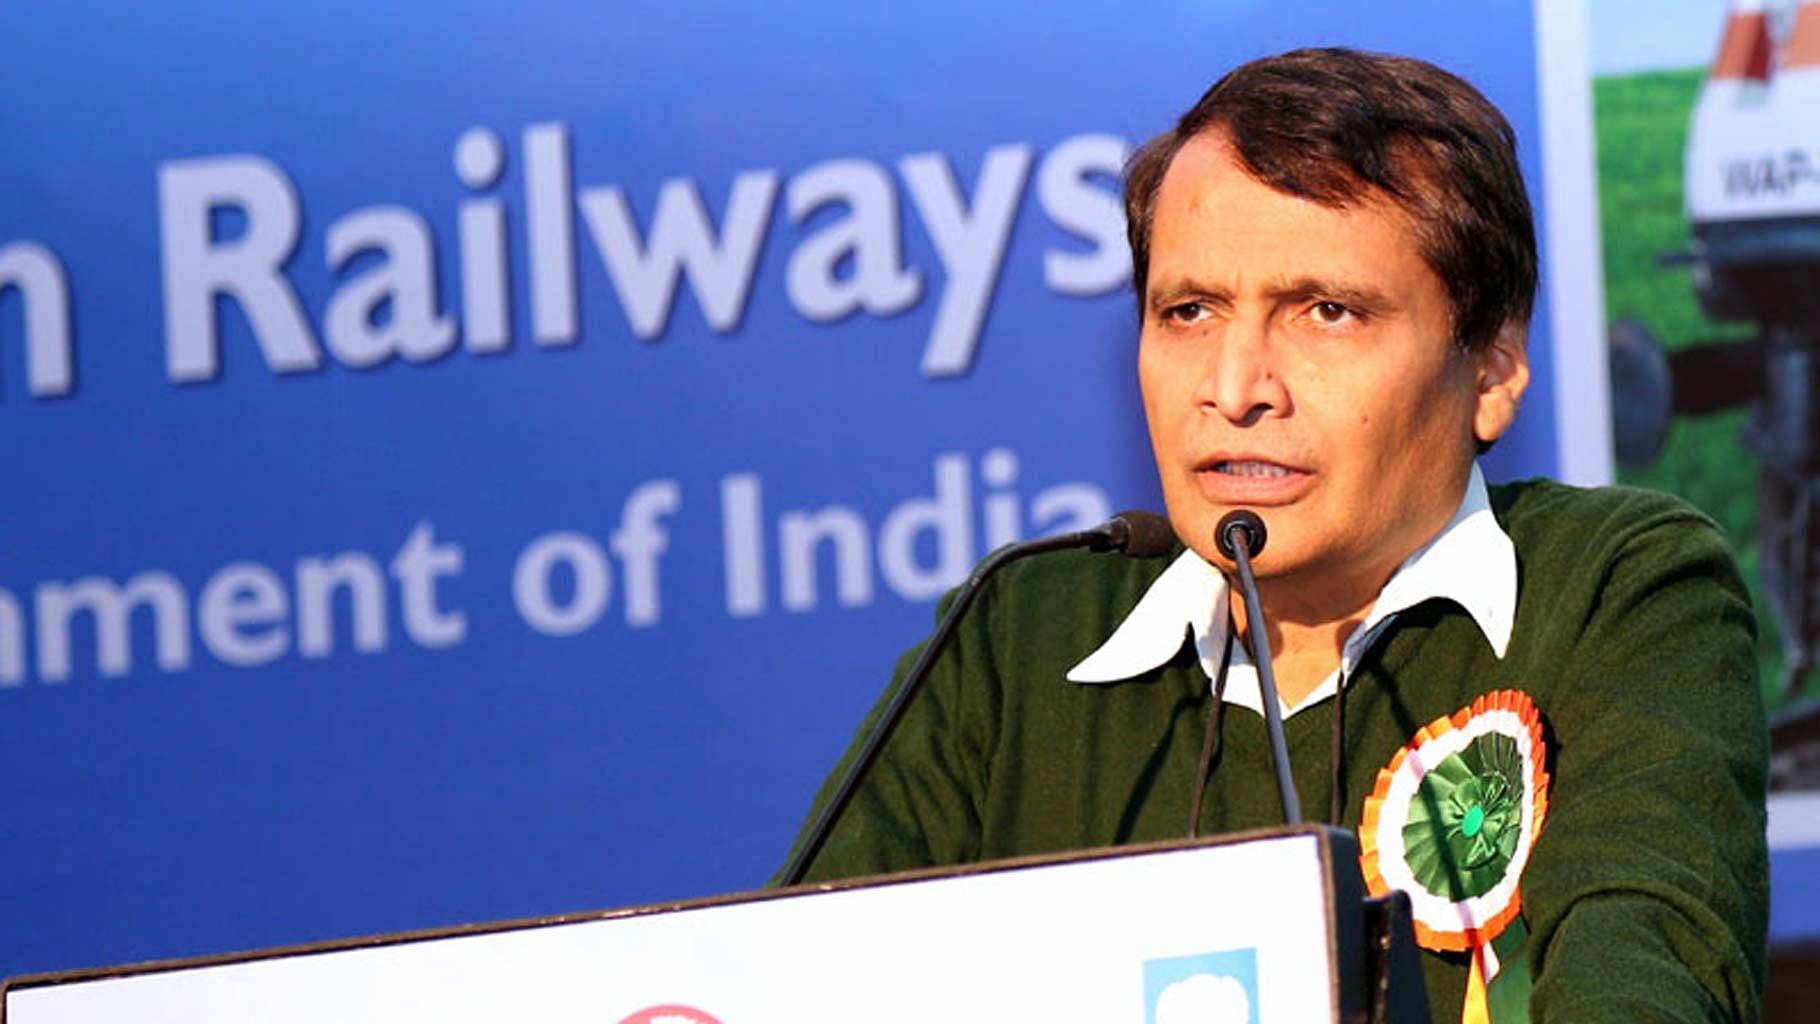 Railway Minister Suresh Prabhu at the International Summit on Energy Efficient Technologies in Railways on on November 06, 2015. (Photo: <a href="http://pib.nic.in/newsite/pmphoto.aspx?mincode=23">PIB</a>)